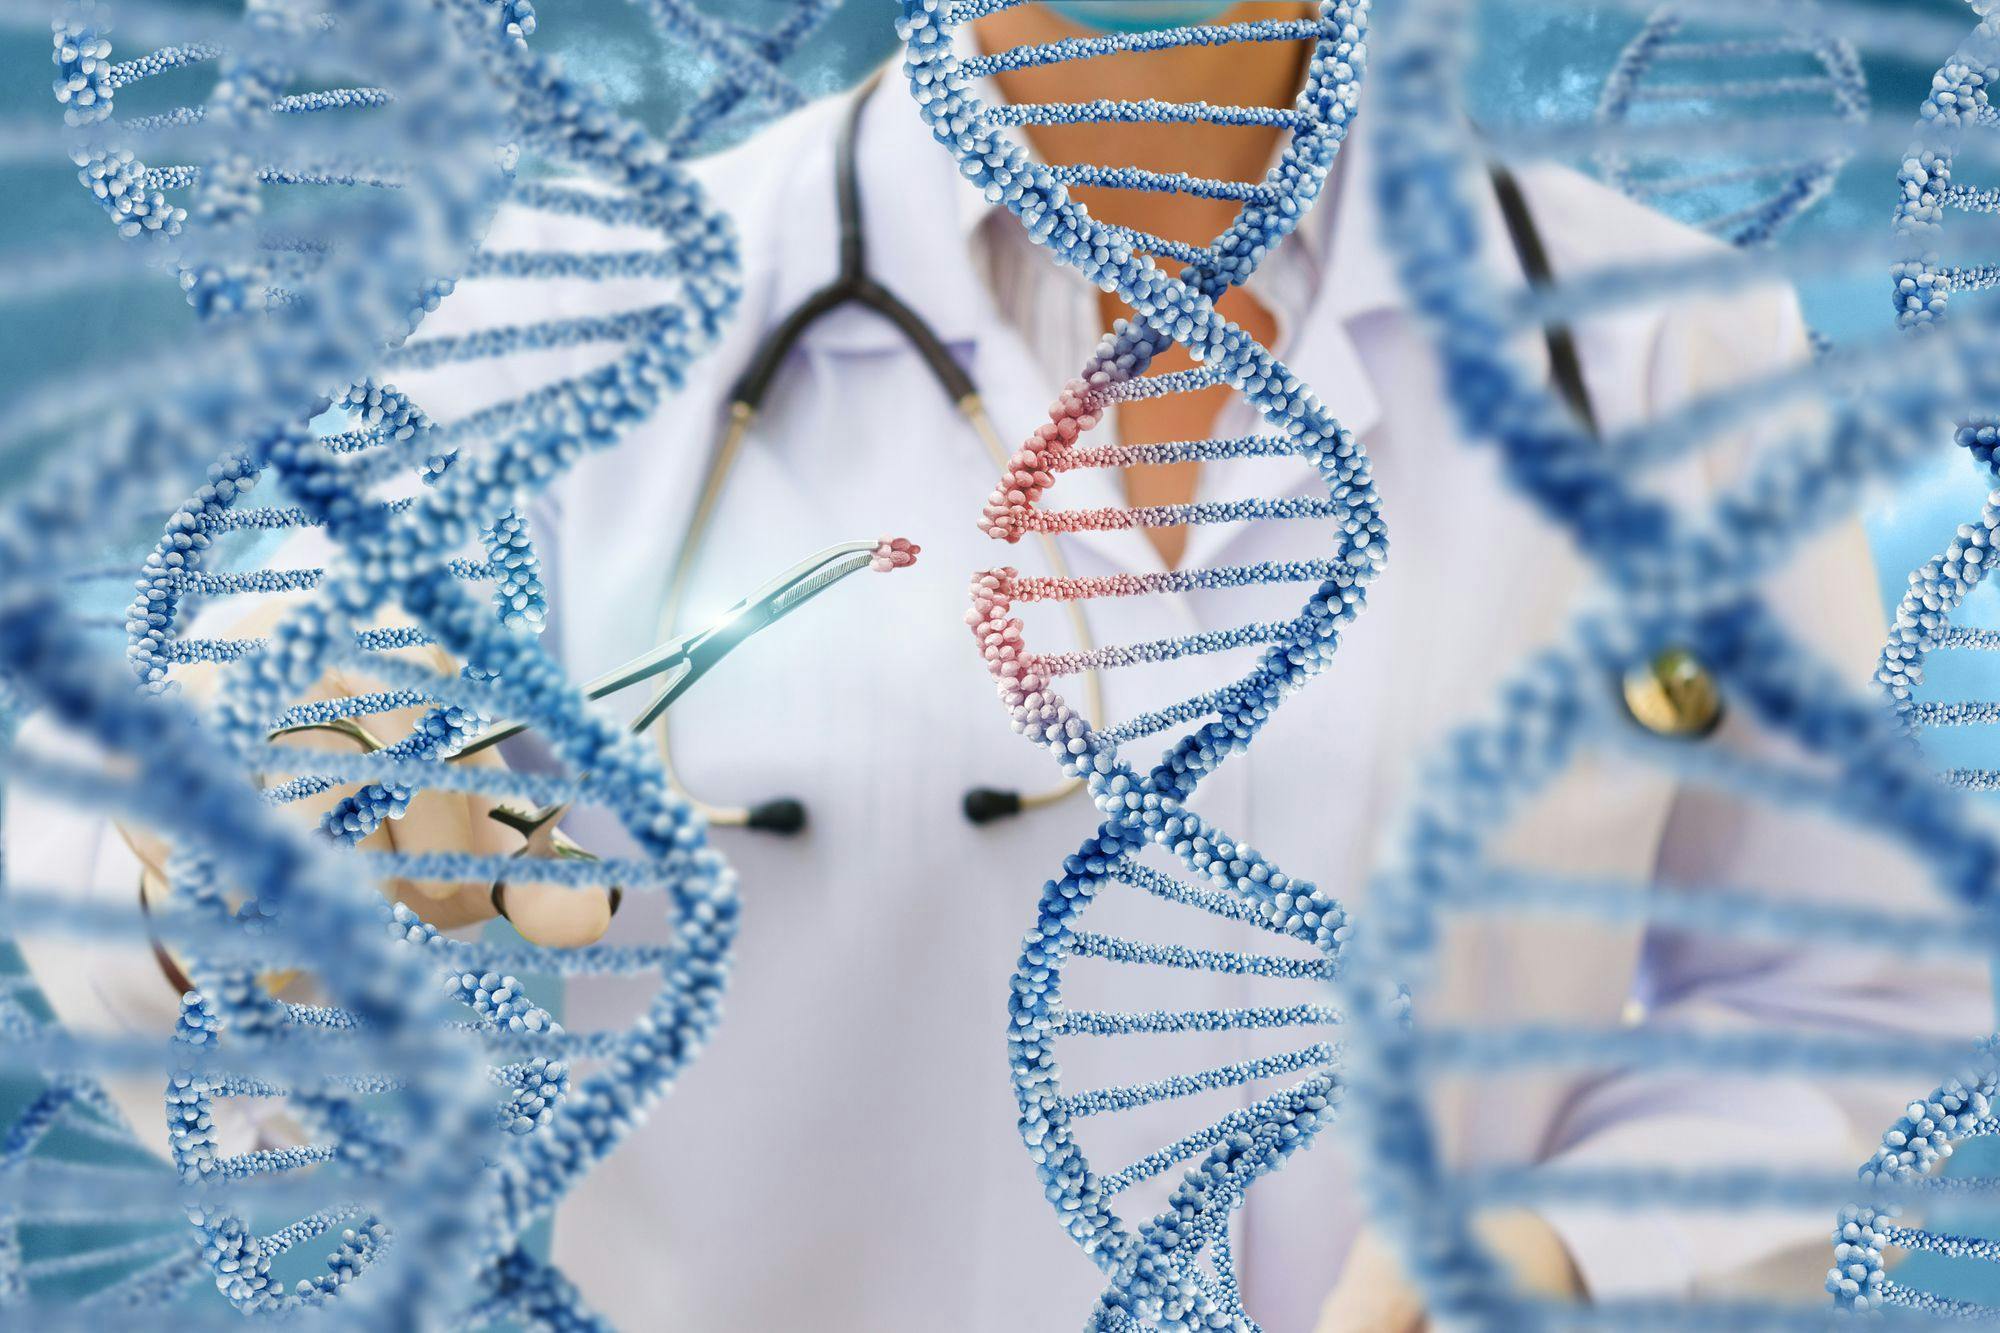 Pharmacists Play Role in Pharmacogenomics Clinical Services